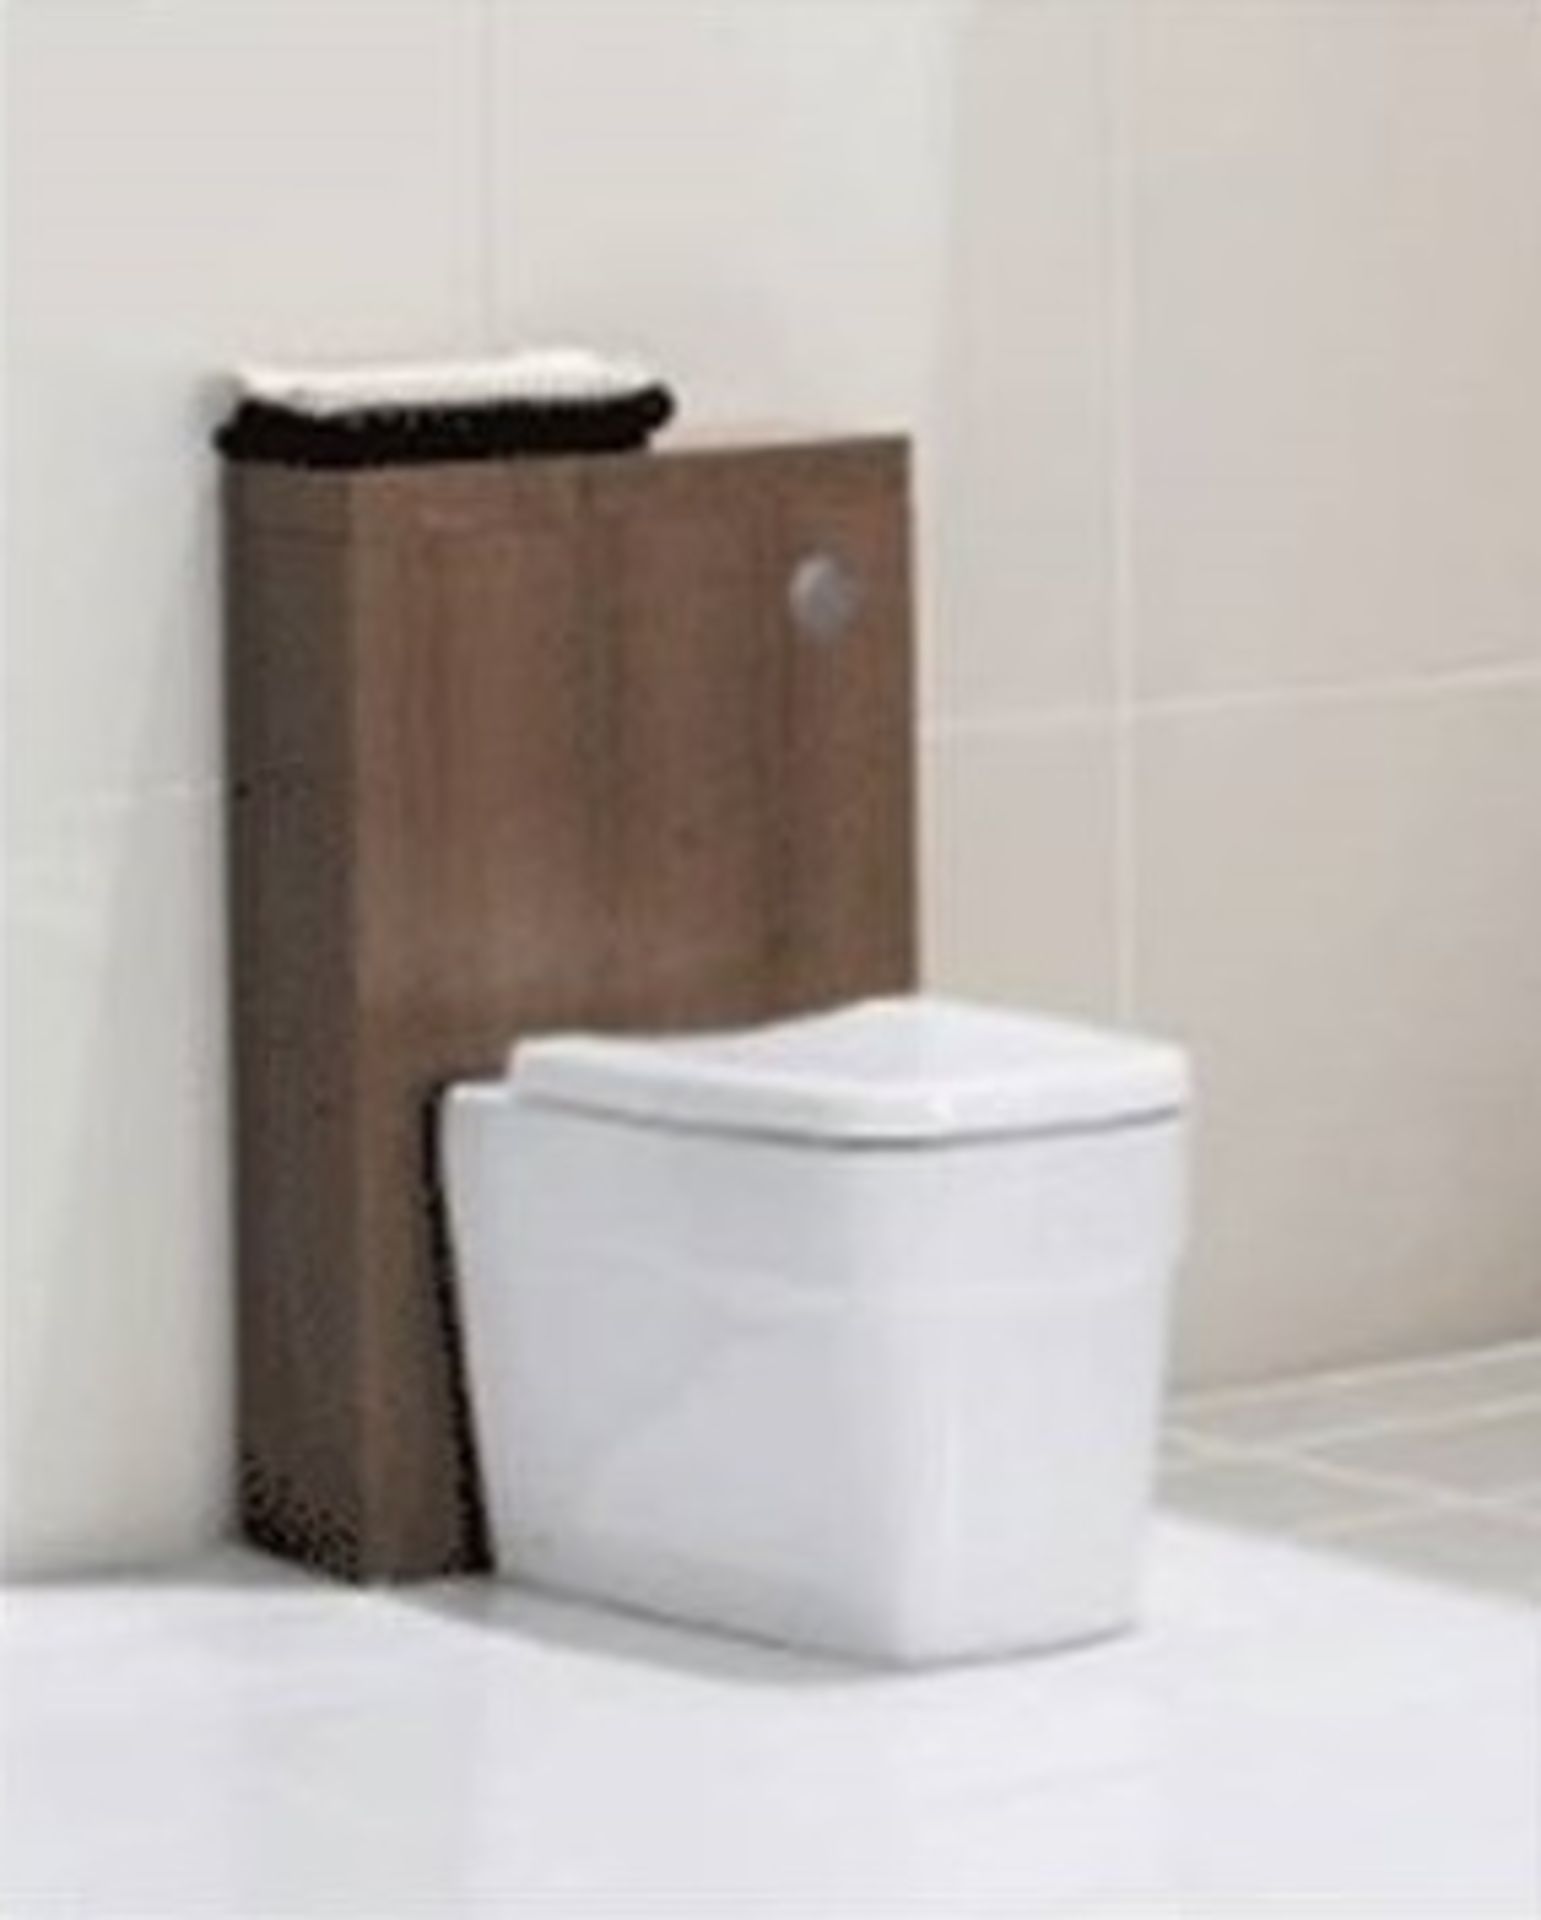 1 x Vogue ARC Bathroom BTW Cistern Unit With Top Shelf - Natural Oak - Type 2E - Manufactured to the